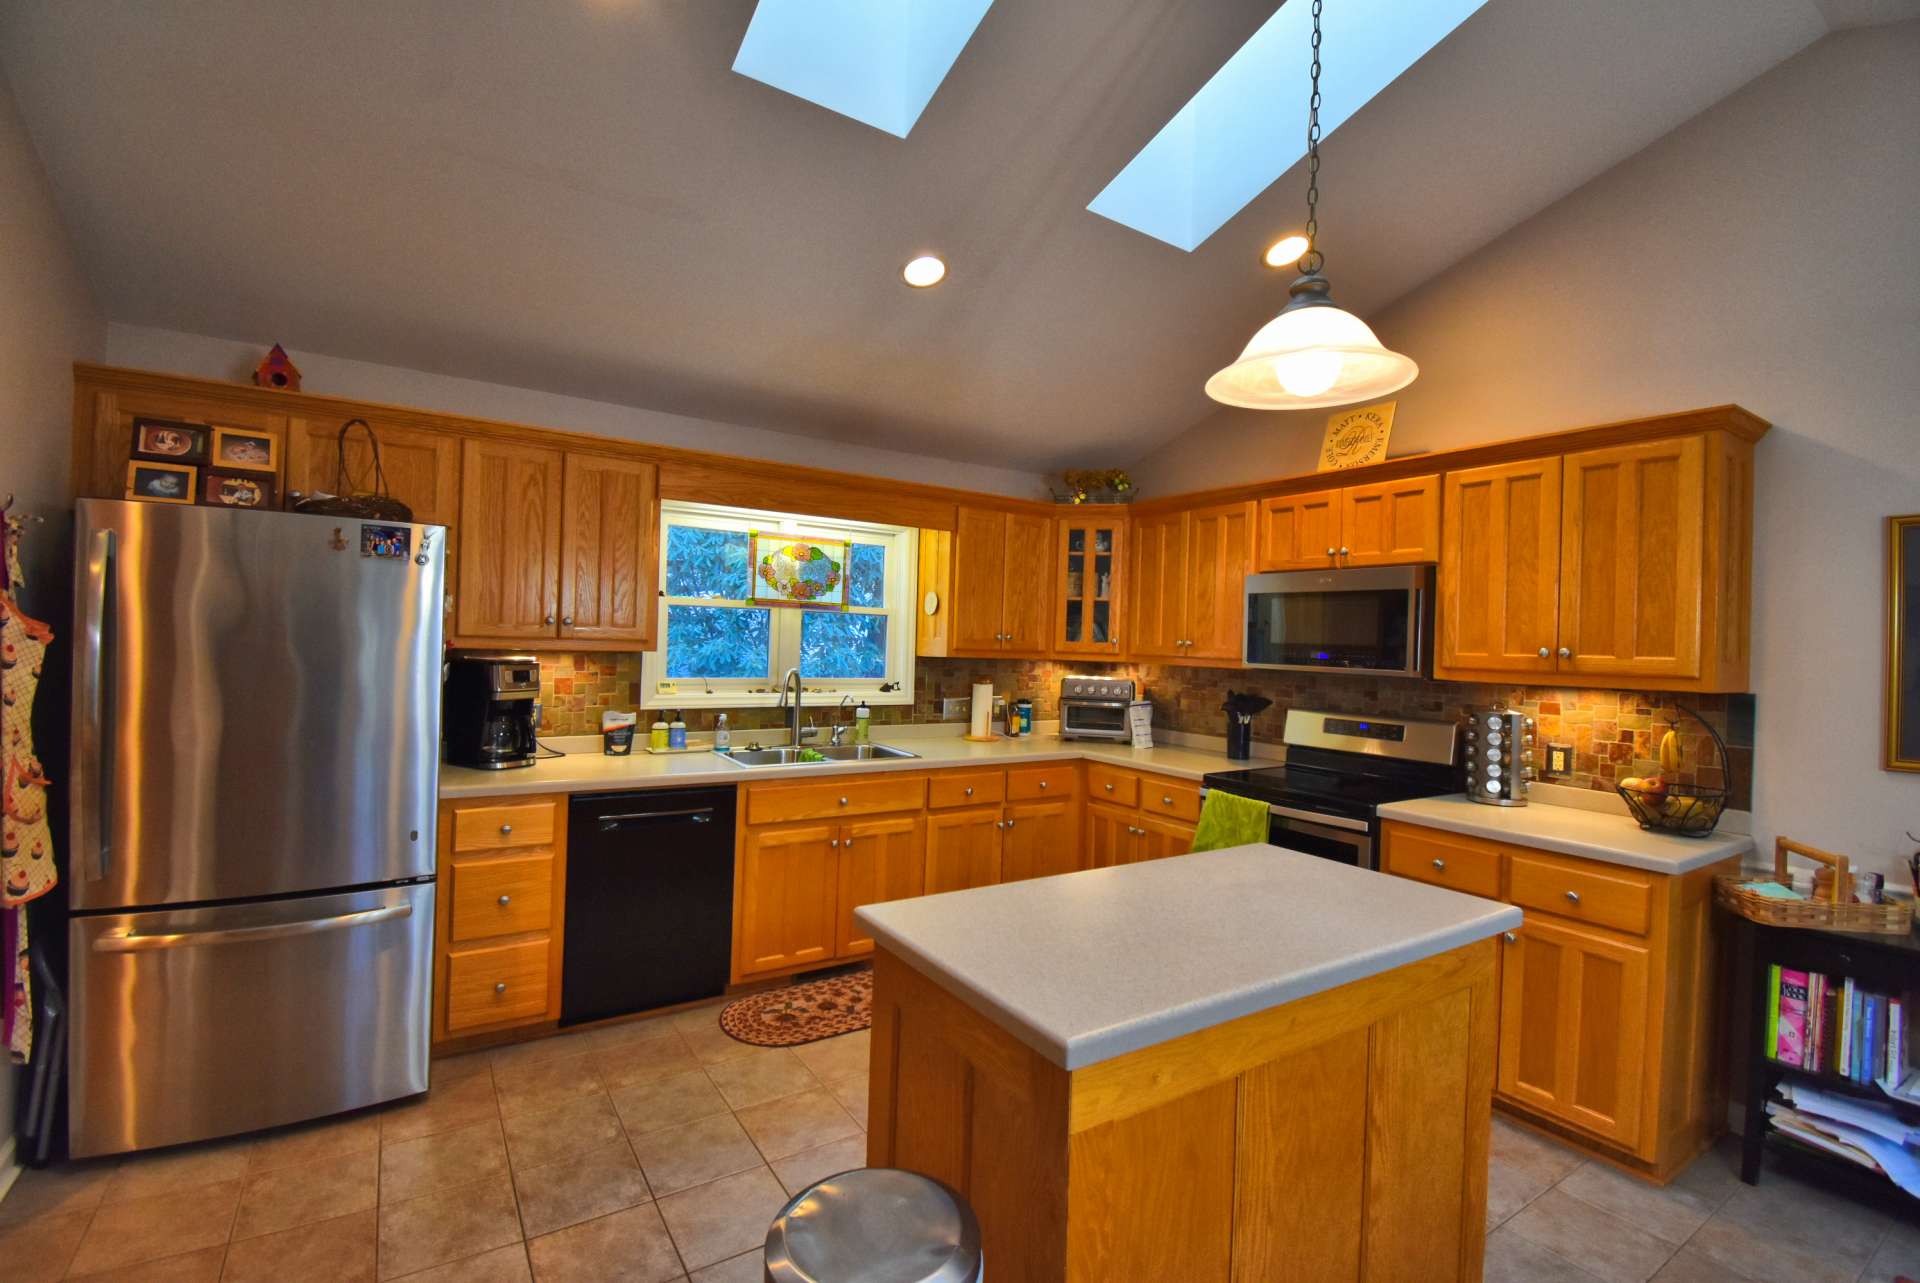 This spacious kitchen provides space for help for meal preparation and cleanup.